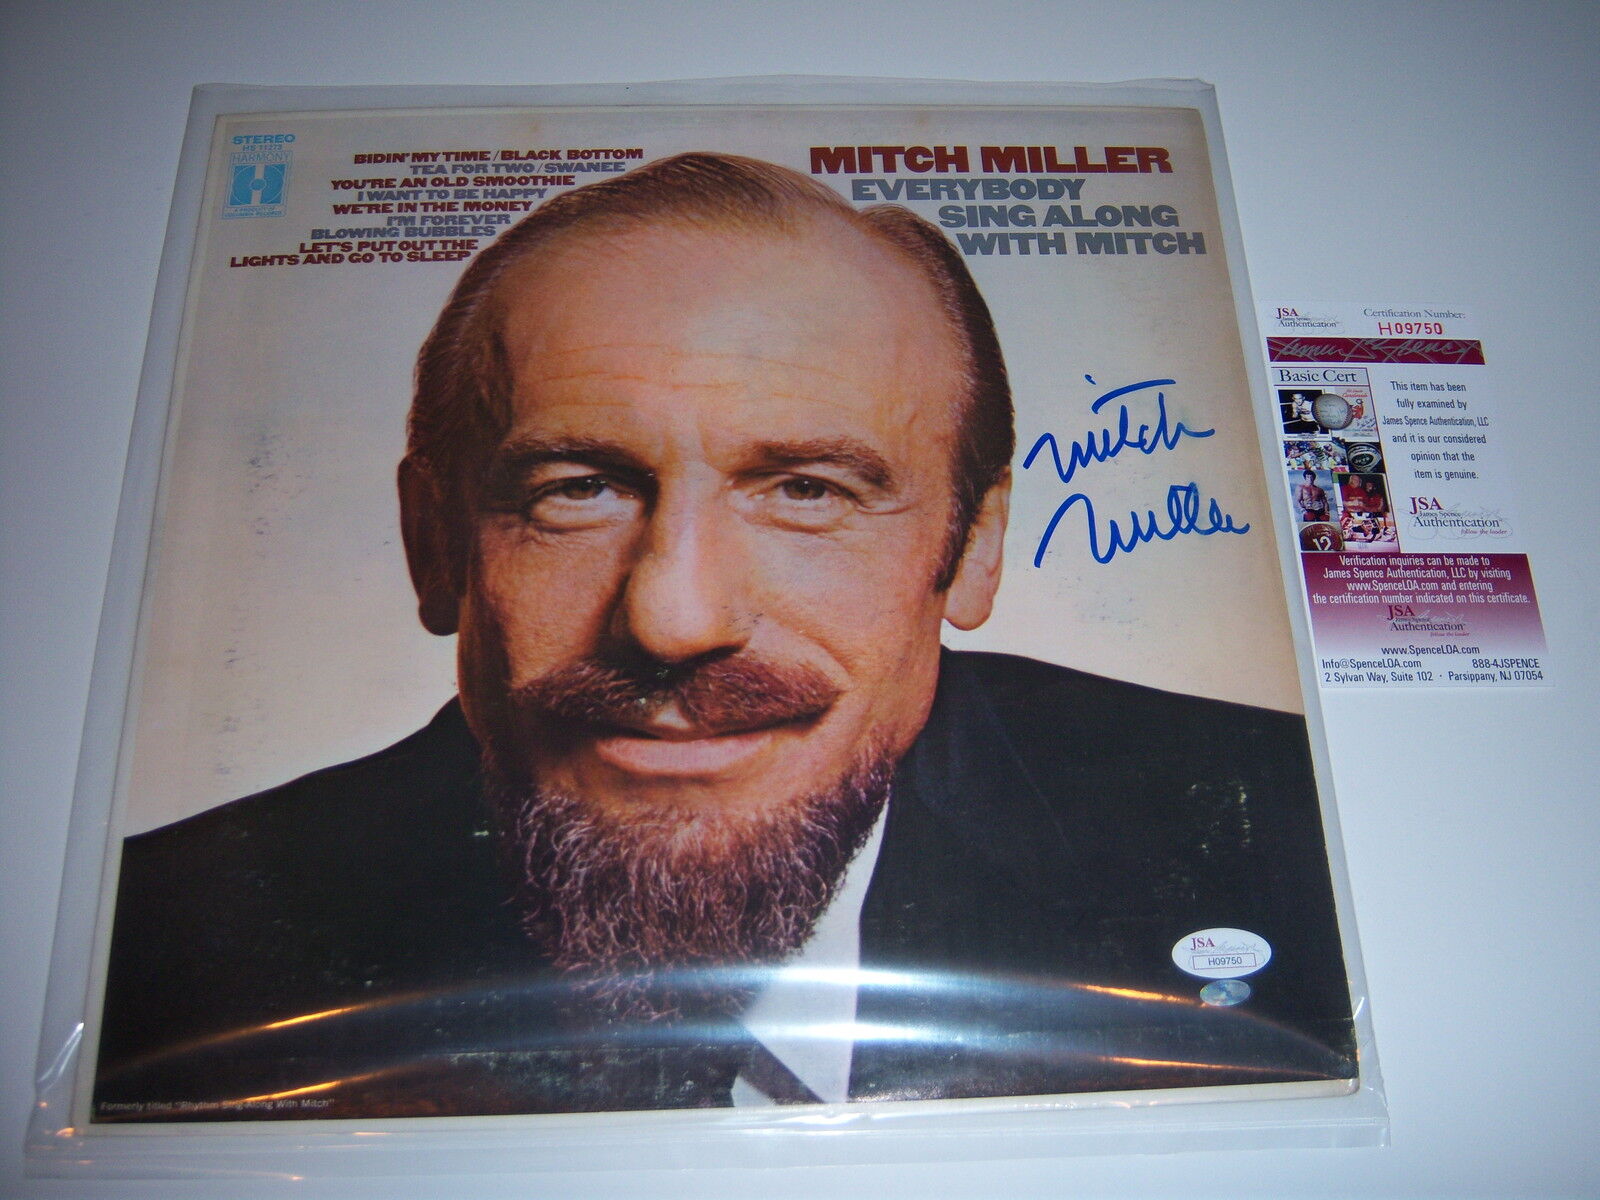 MITCH MILLER EVERYBODY SING ALONG WITH SIGNED R LP Minneapolis Mall COA JSA Bargain